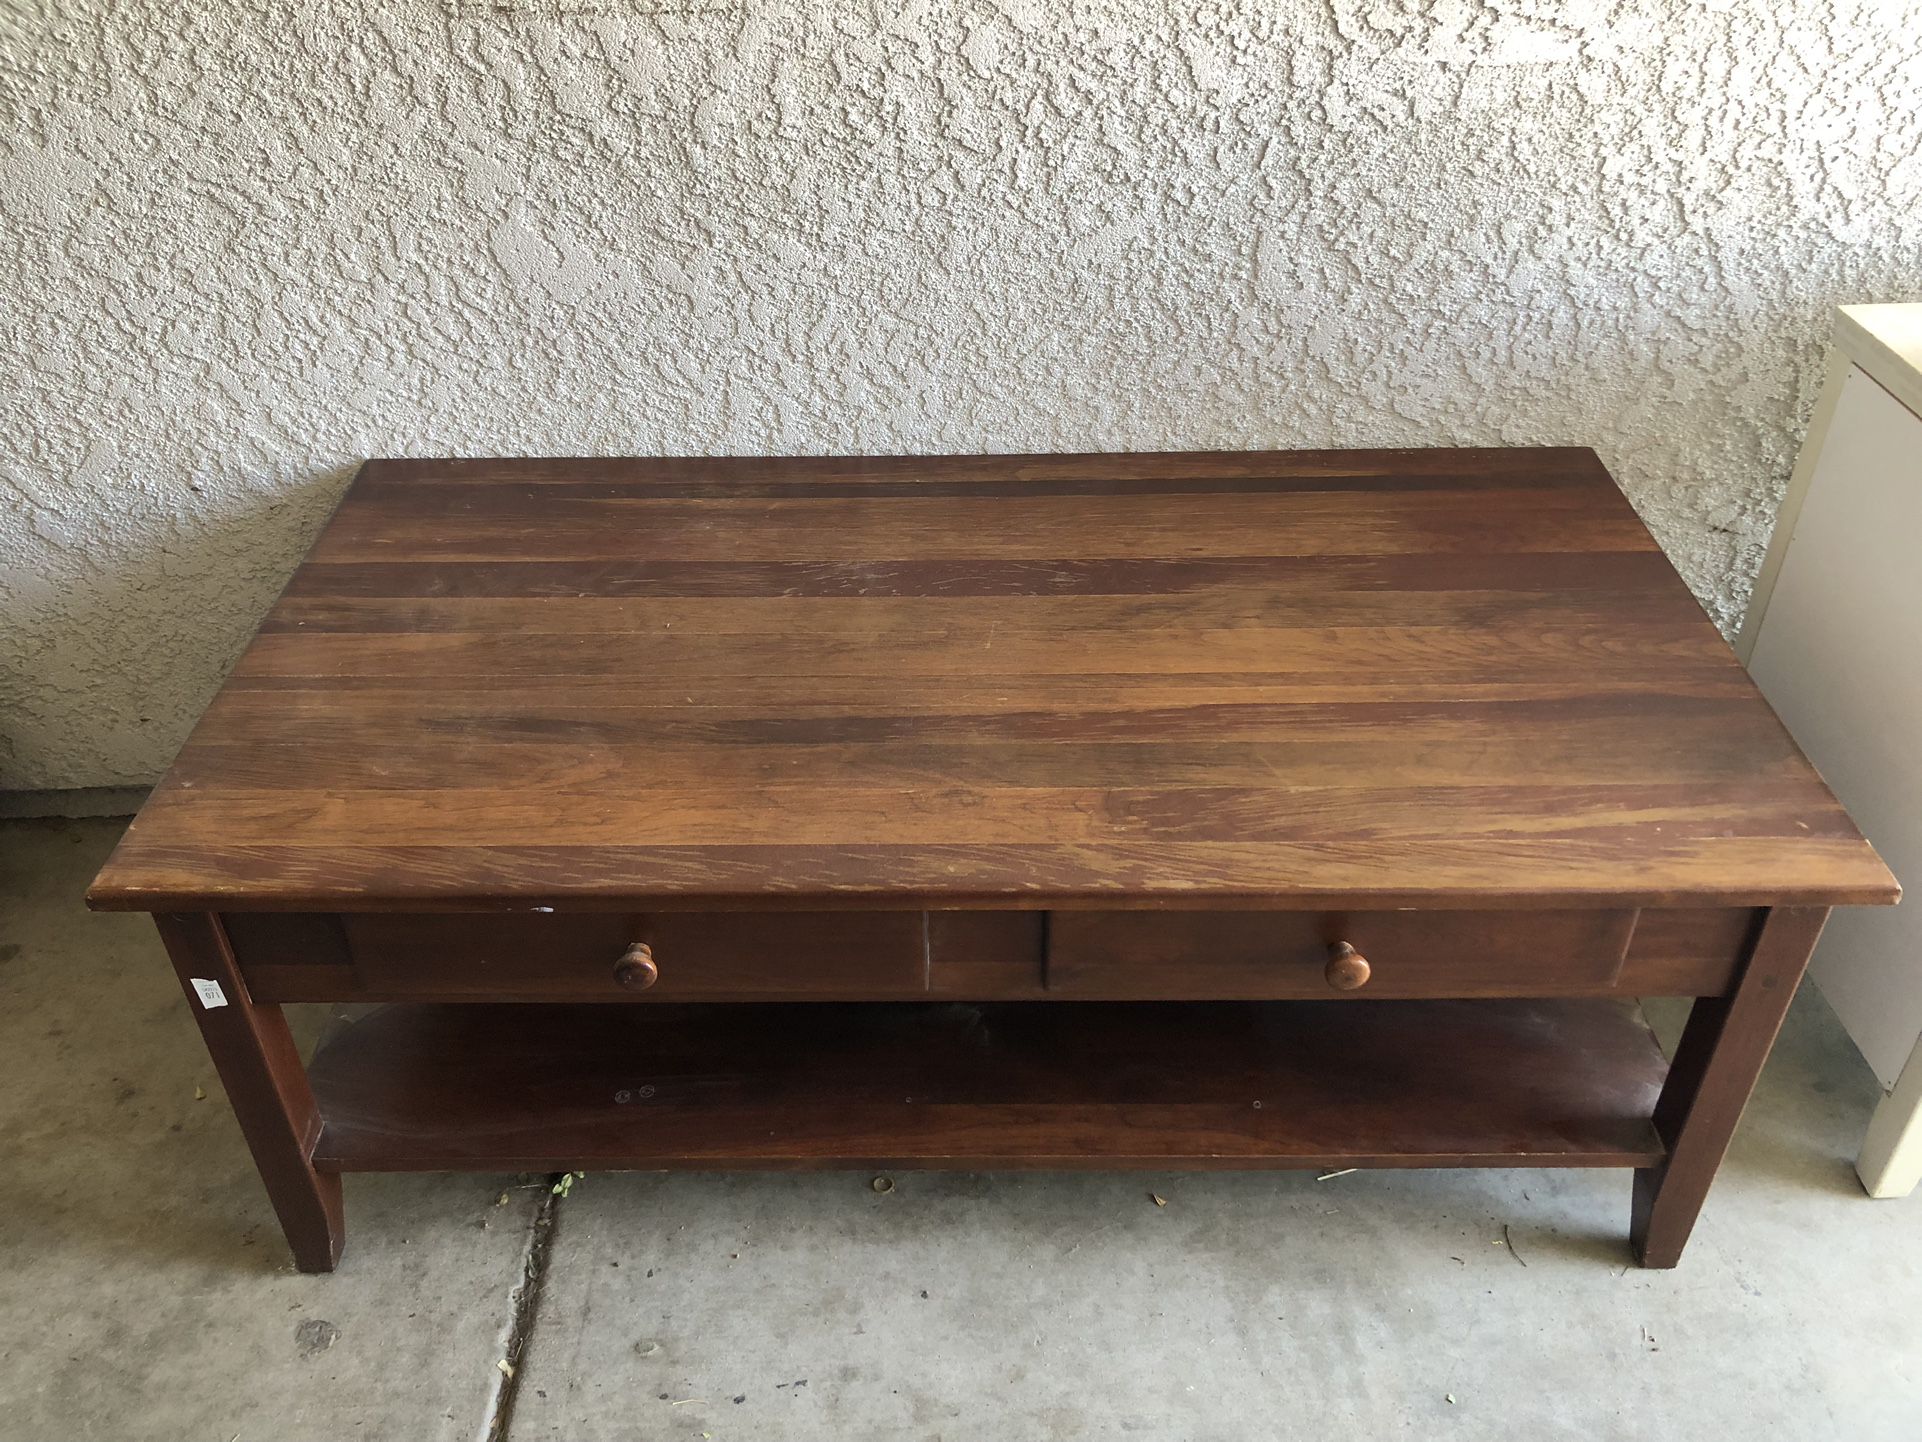 Solid Wood Coffee Table Only $40